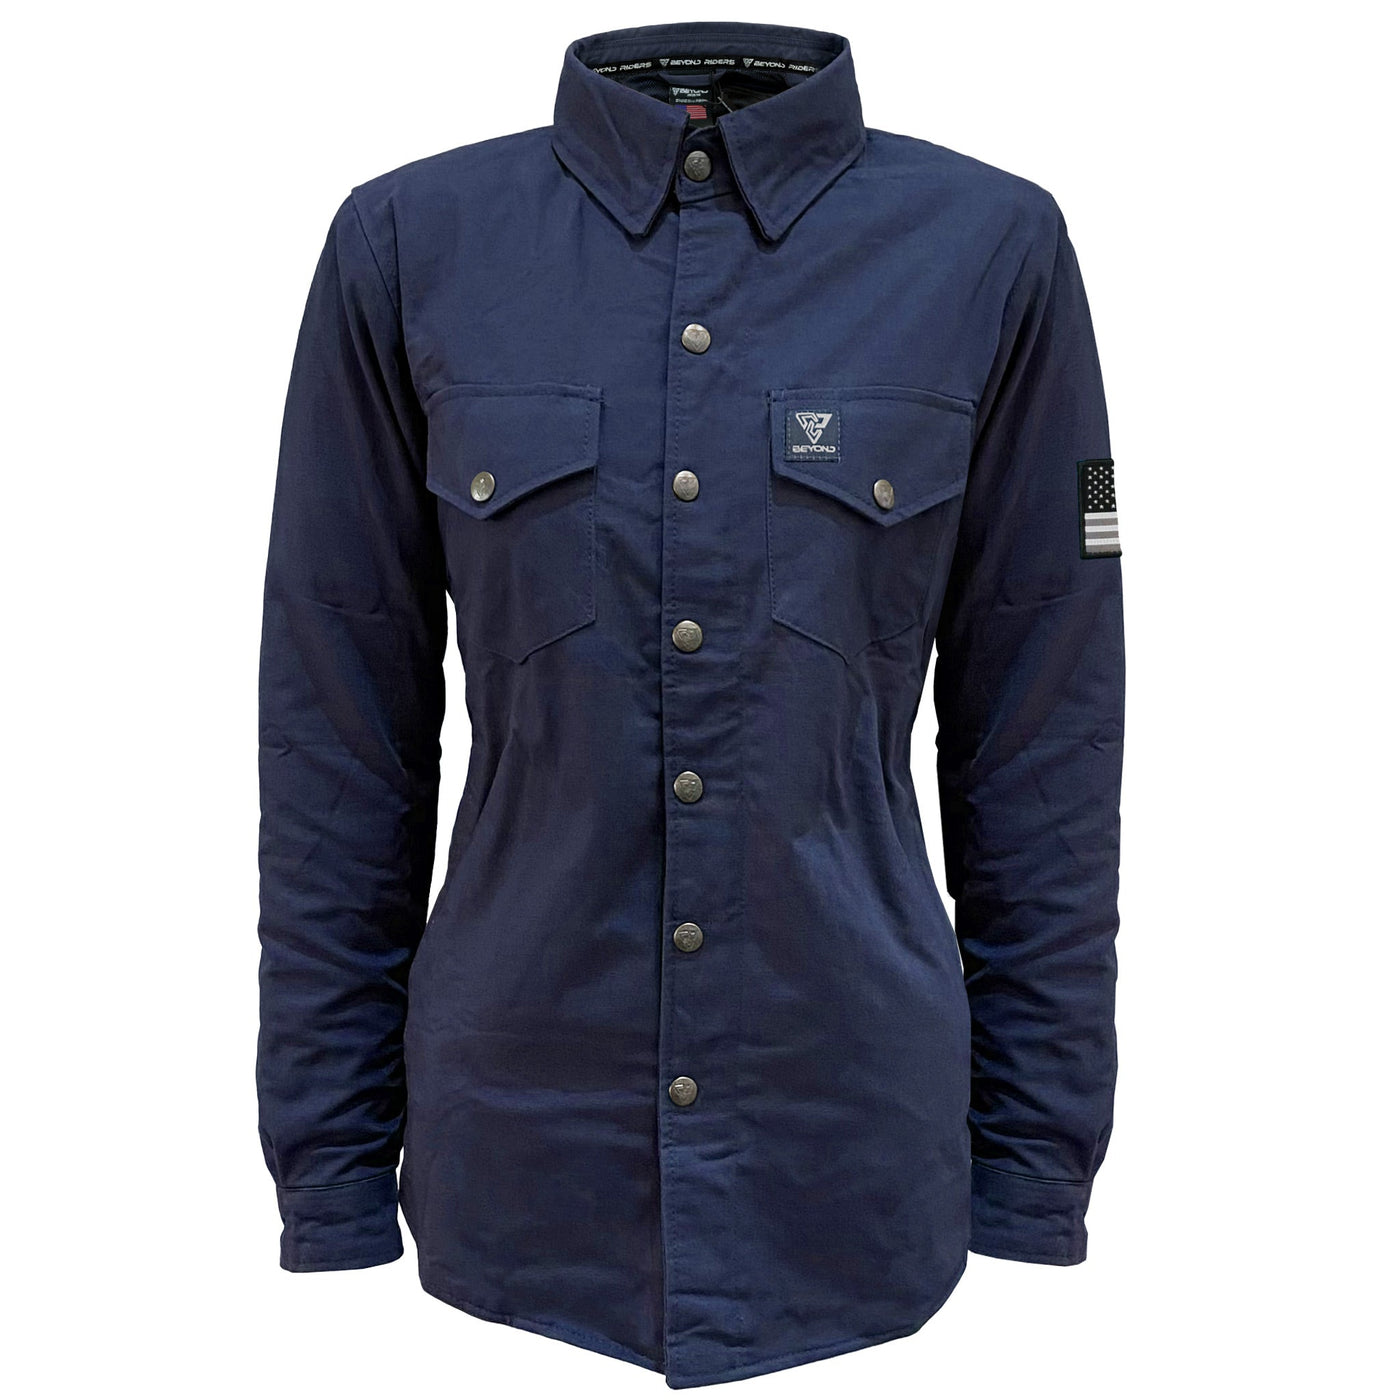 Protective Canvas Jacket with Pads for Women - Navy Blue